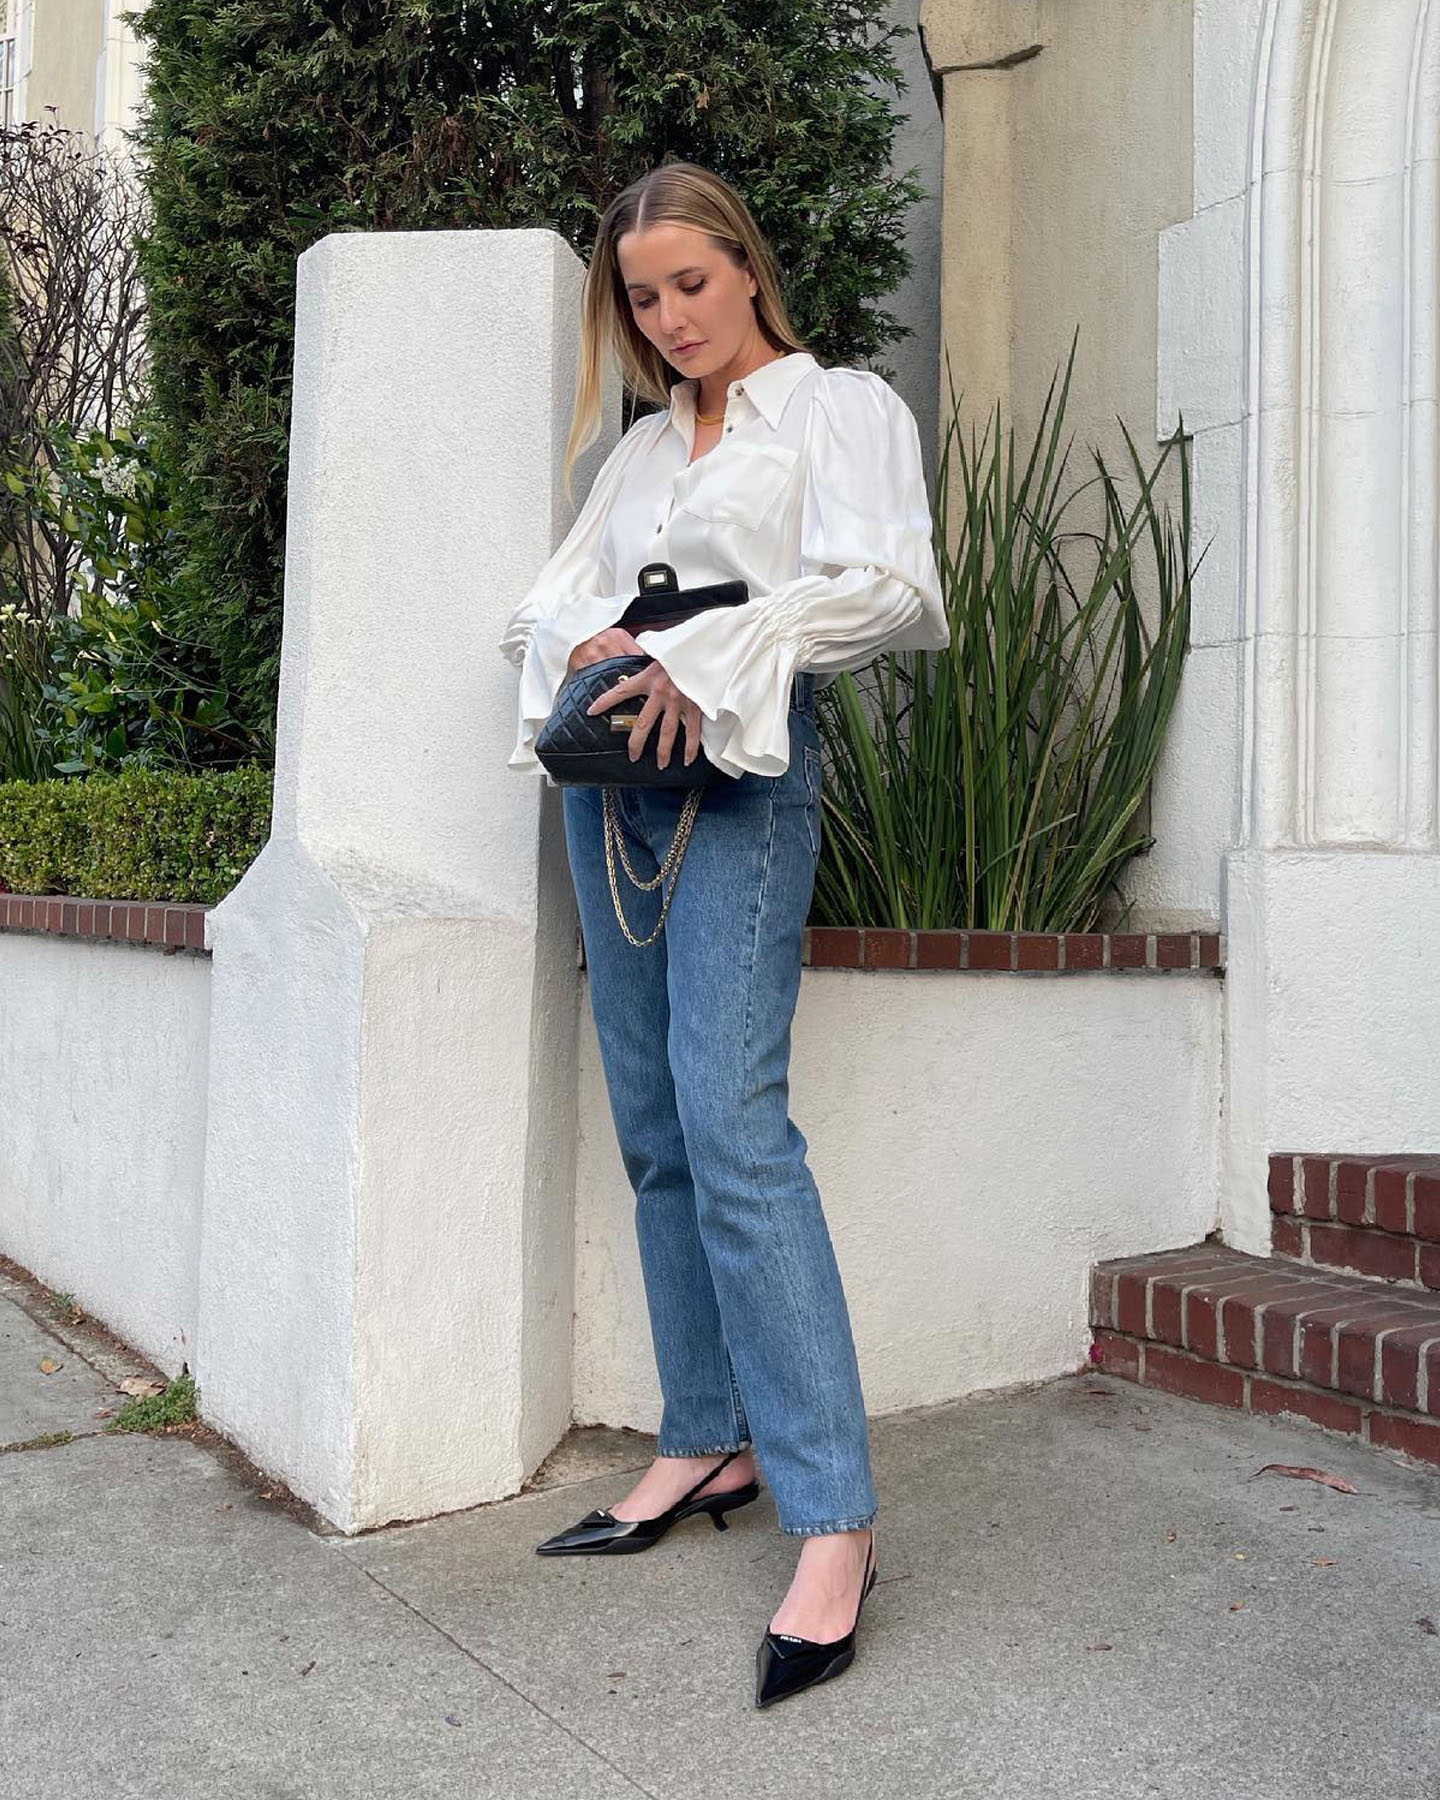 fashion editor Kristen Nichols poses in an outfit with statement white top, jeans, and black slingback kitten heels